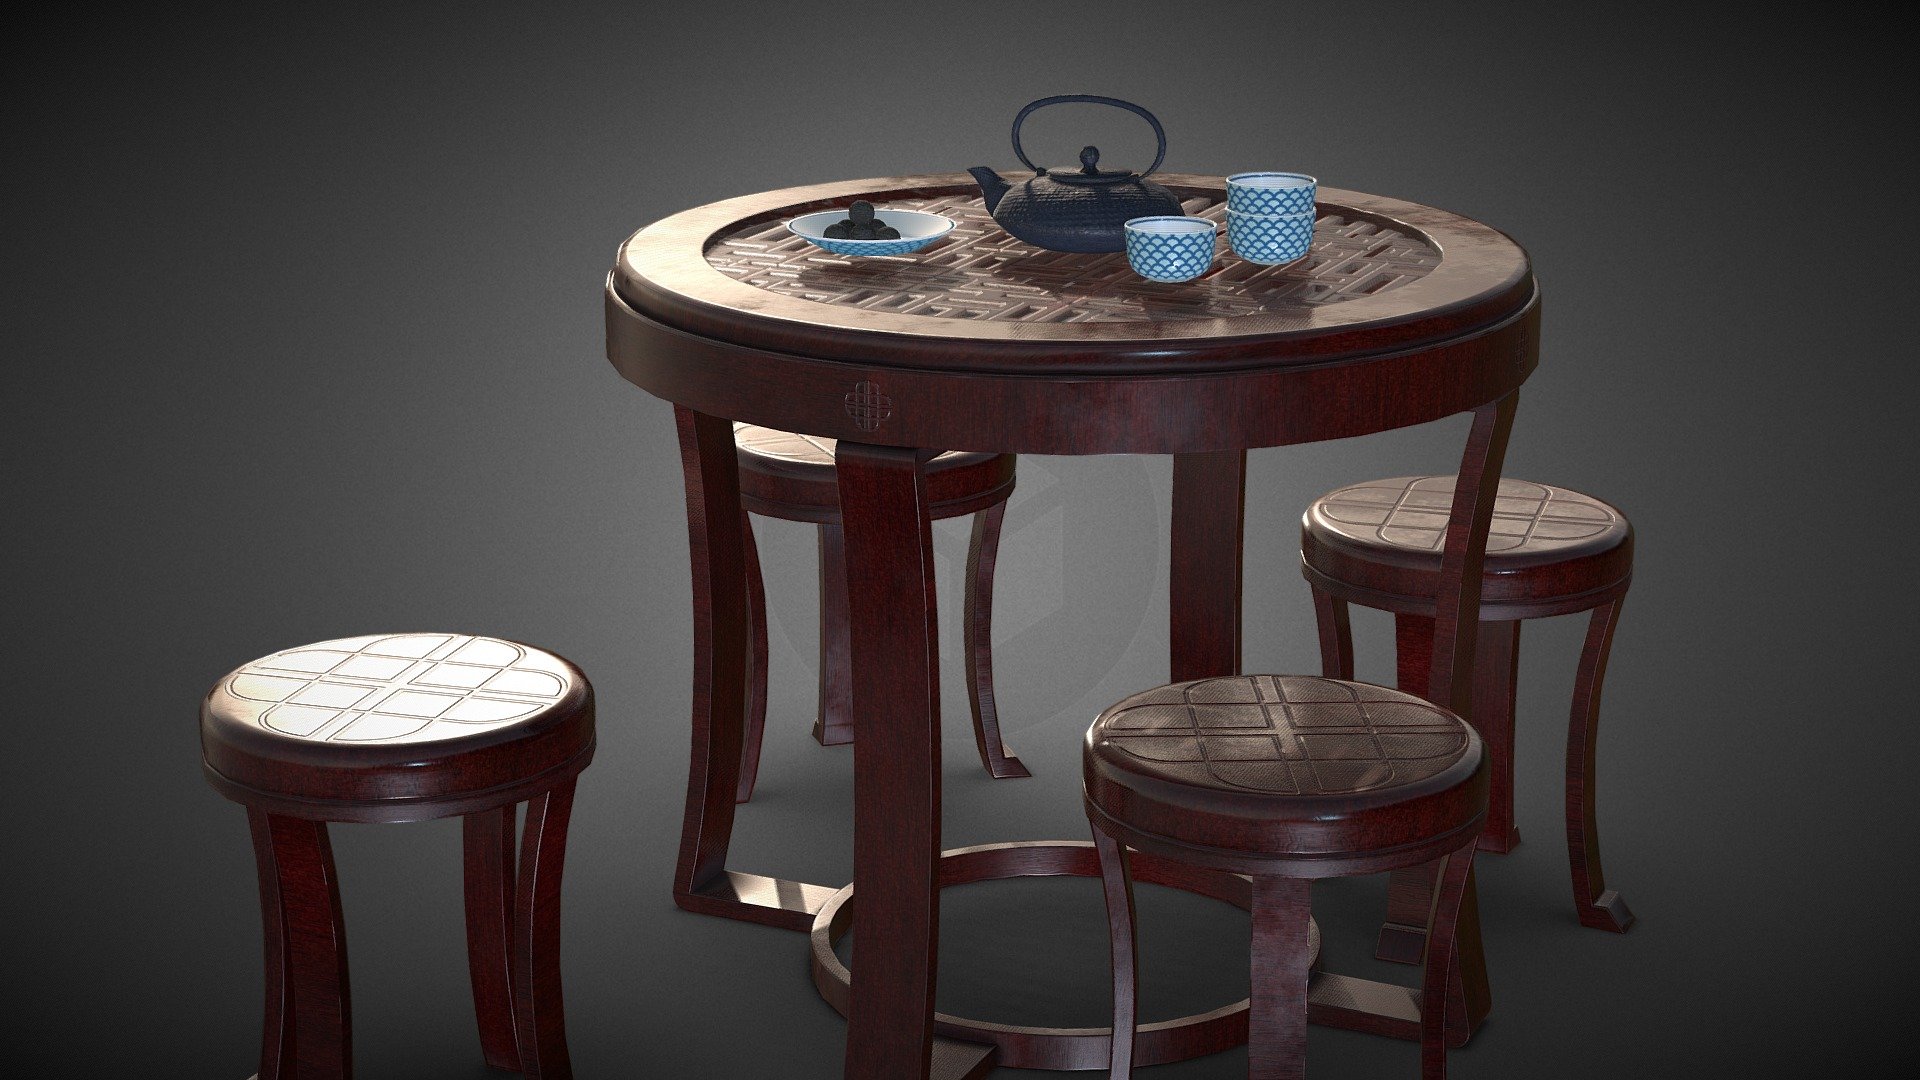 Chinese style tea table set. 
high to low poly modeling and UV's in Blender, texturing in Substance Painter.

Contains : 

-1Table/ 1glass top/ 1wood decoration (8 stacked alpha planes)/
-1Stool (4 instances)/
-1Iron cast teapot/
-1Tea cup (3 instances)/
-1Plate/ 
-1Tea ball (6 instances) - Tea Table Set - Buy Royalty Free 3D model by Léonard_Doye Alias Leoskateman (@leoskateman) 3d model